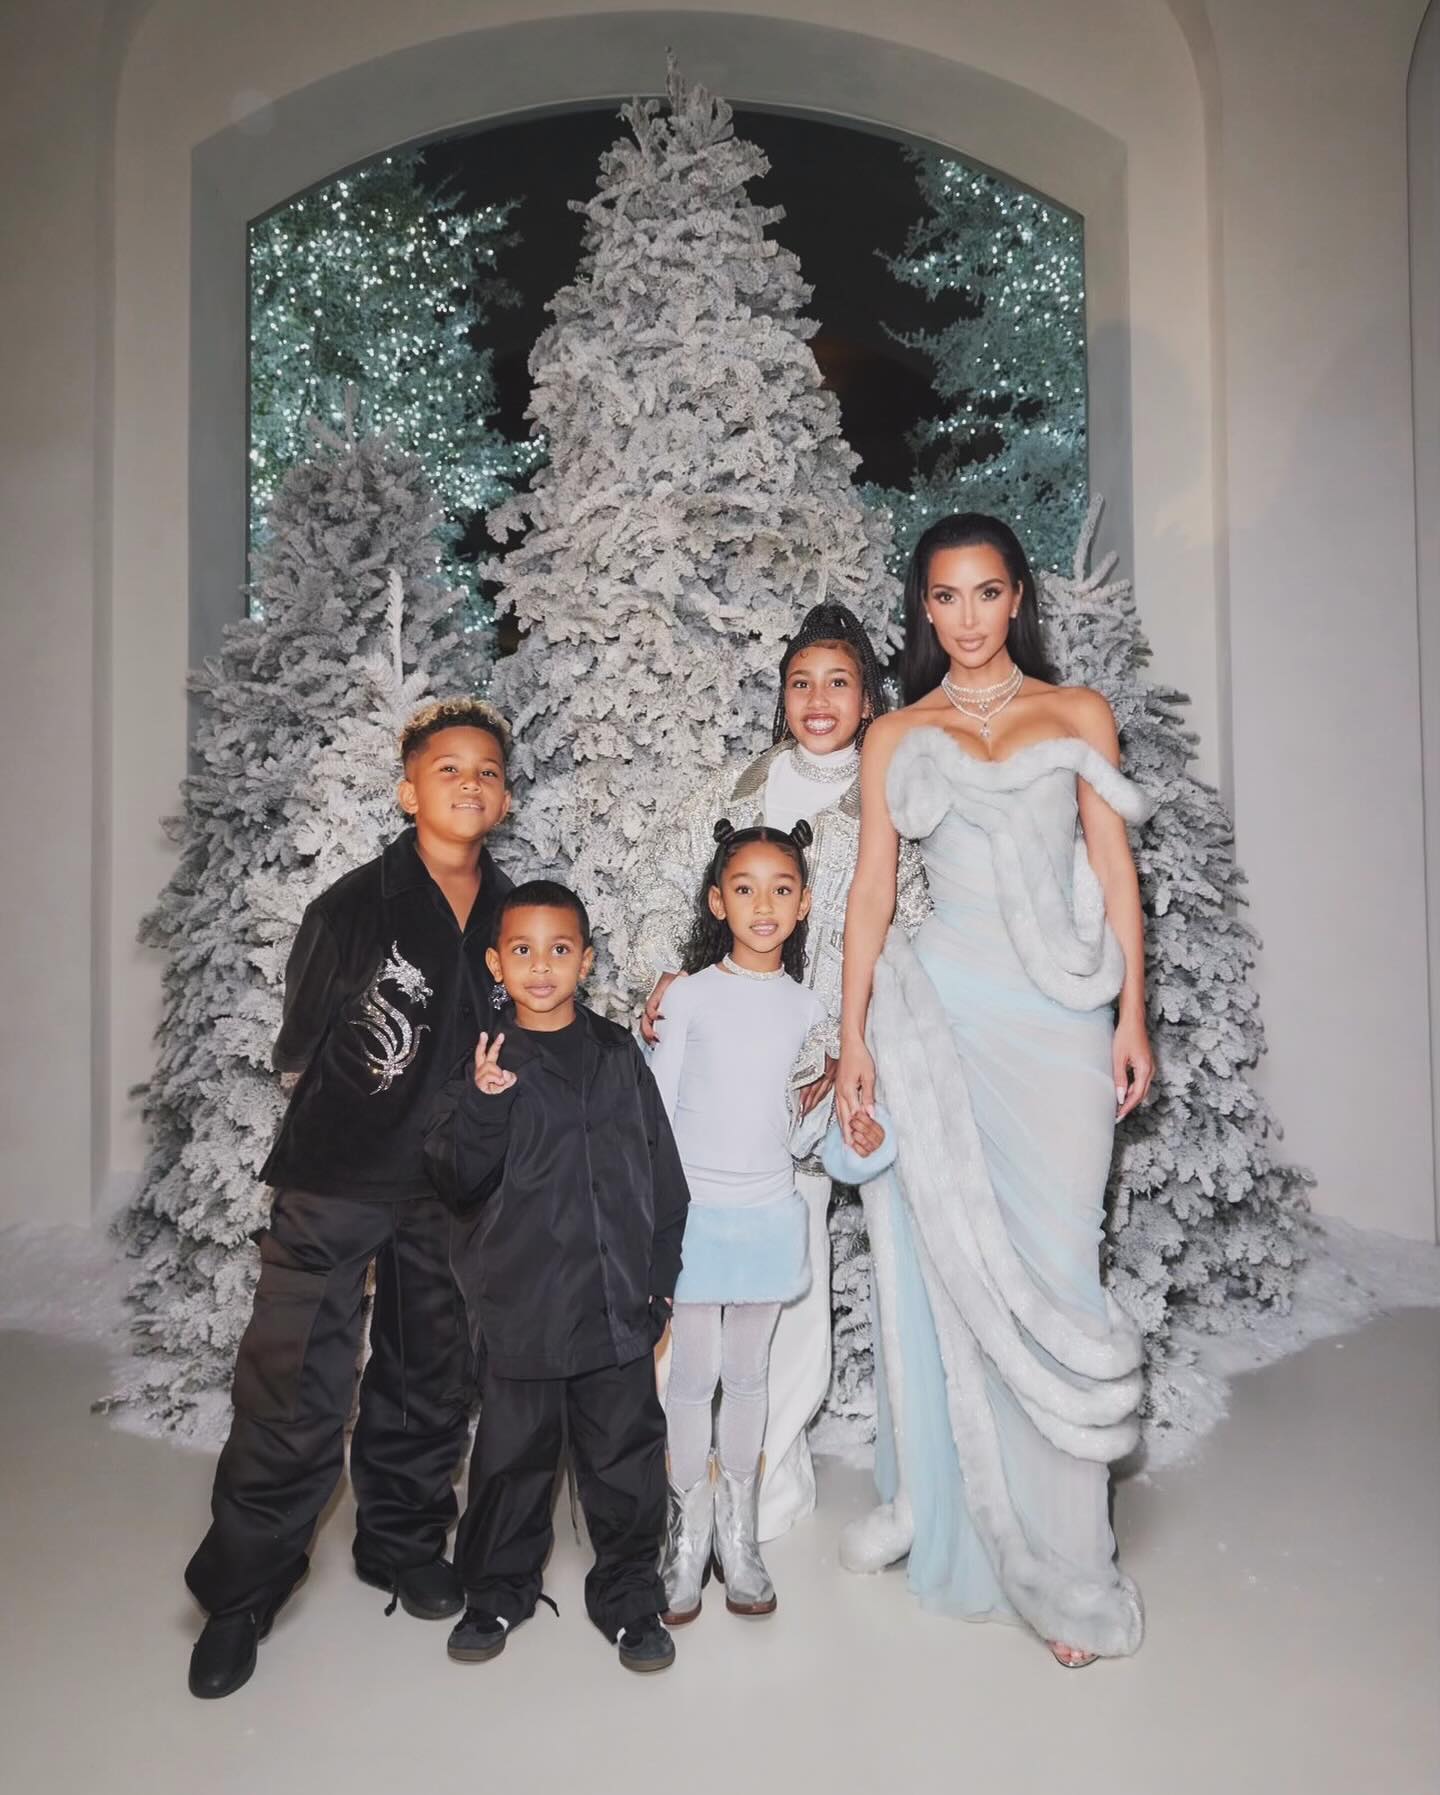 Alongside Saint, Kim and Kanye share daughters North and Chicago, and son Psalm